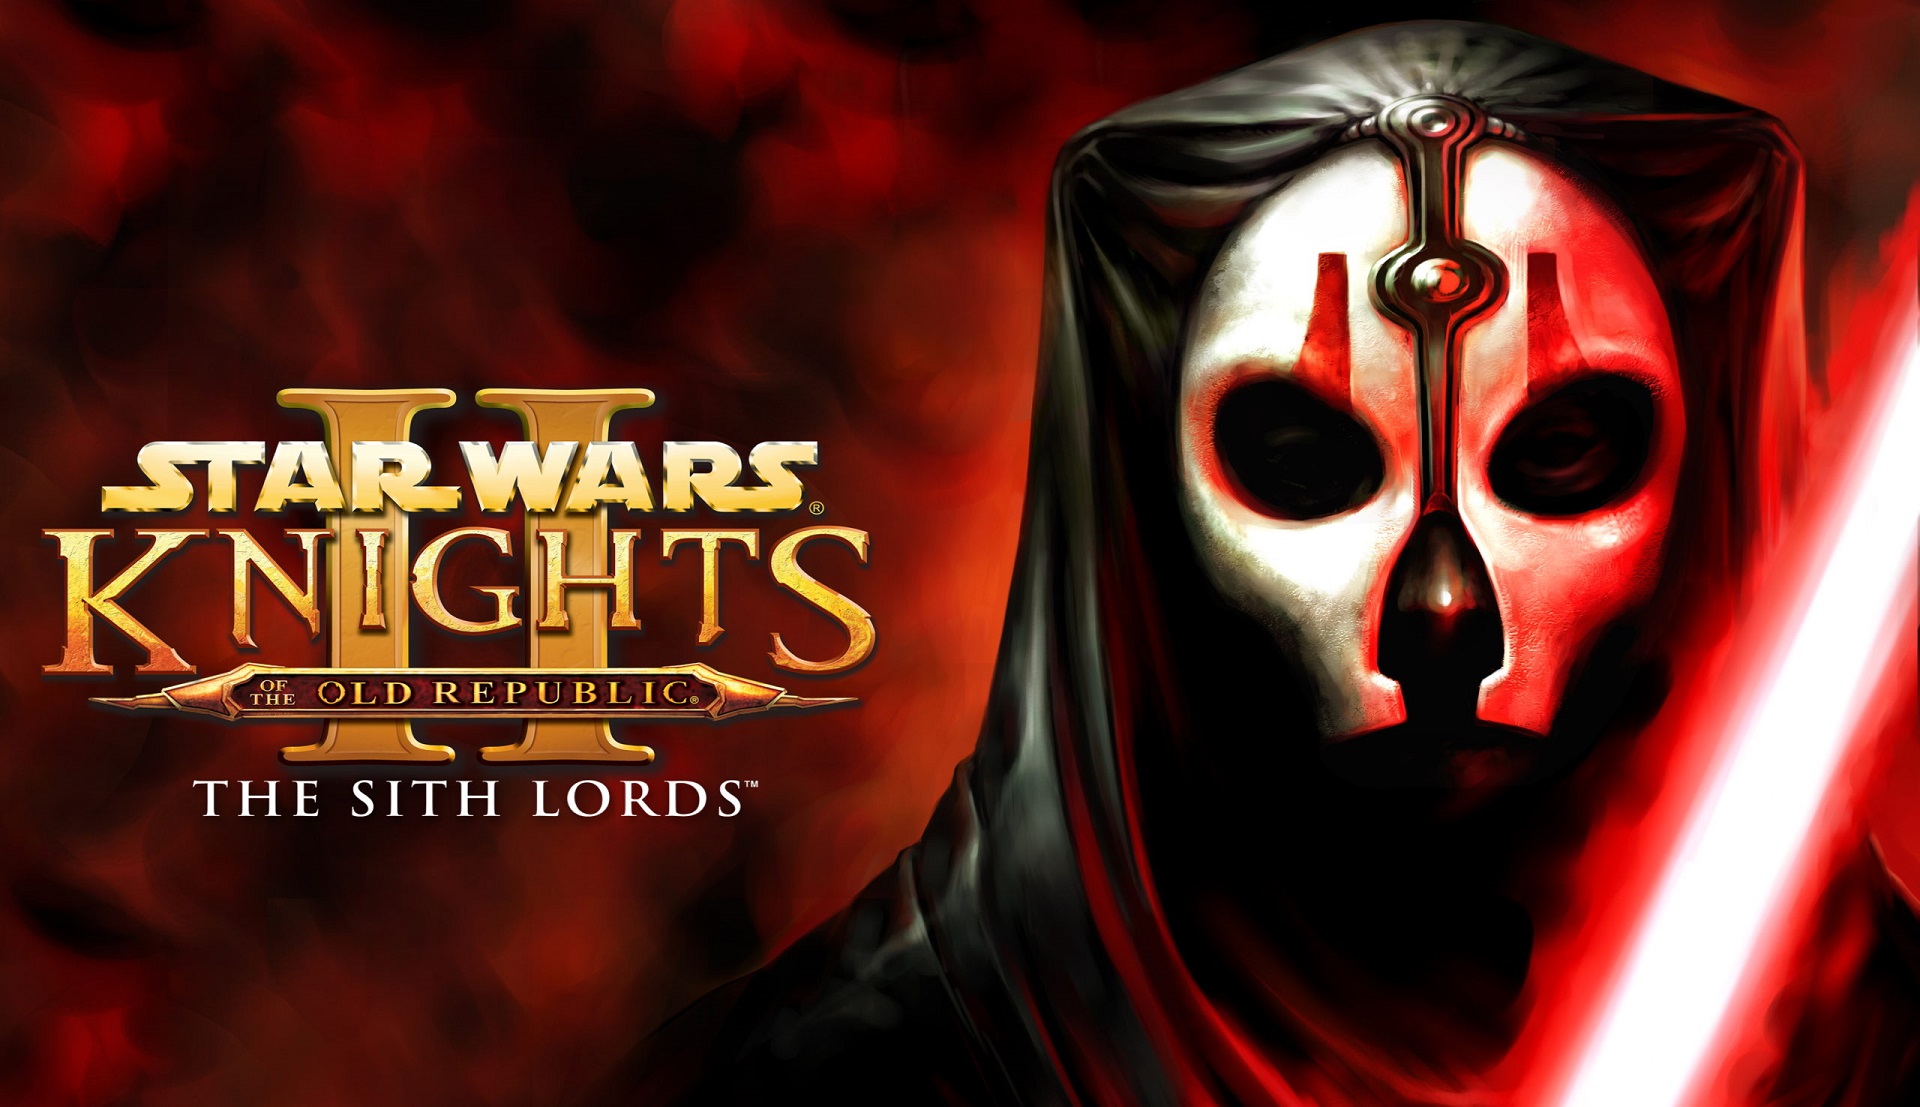 Star wars knight of the old republic 2 русификатор steam фото 3